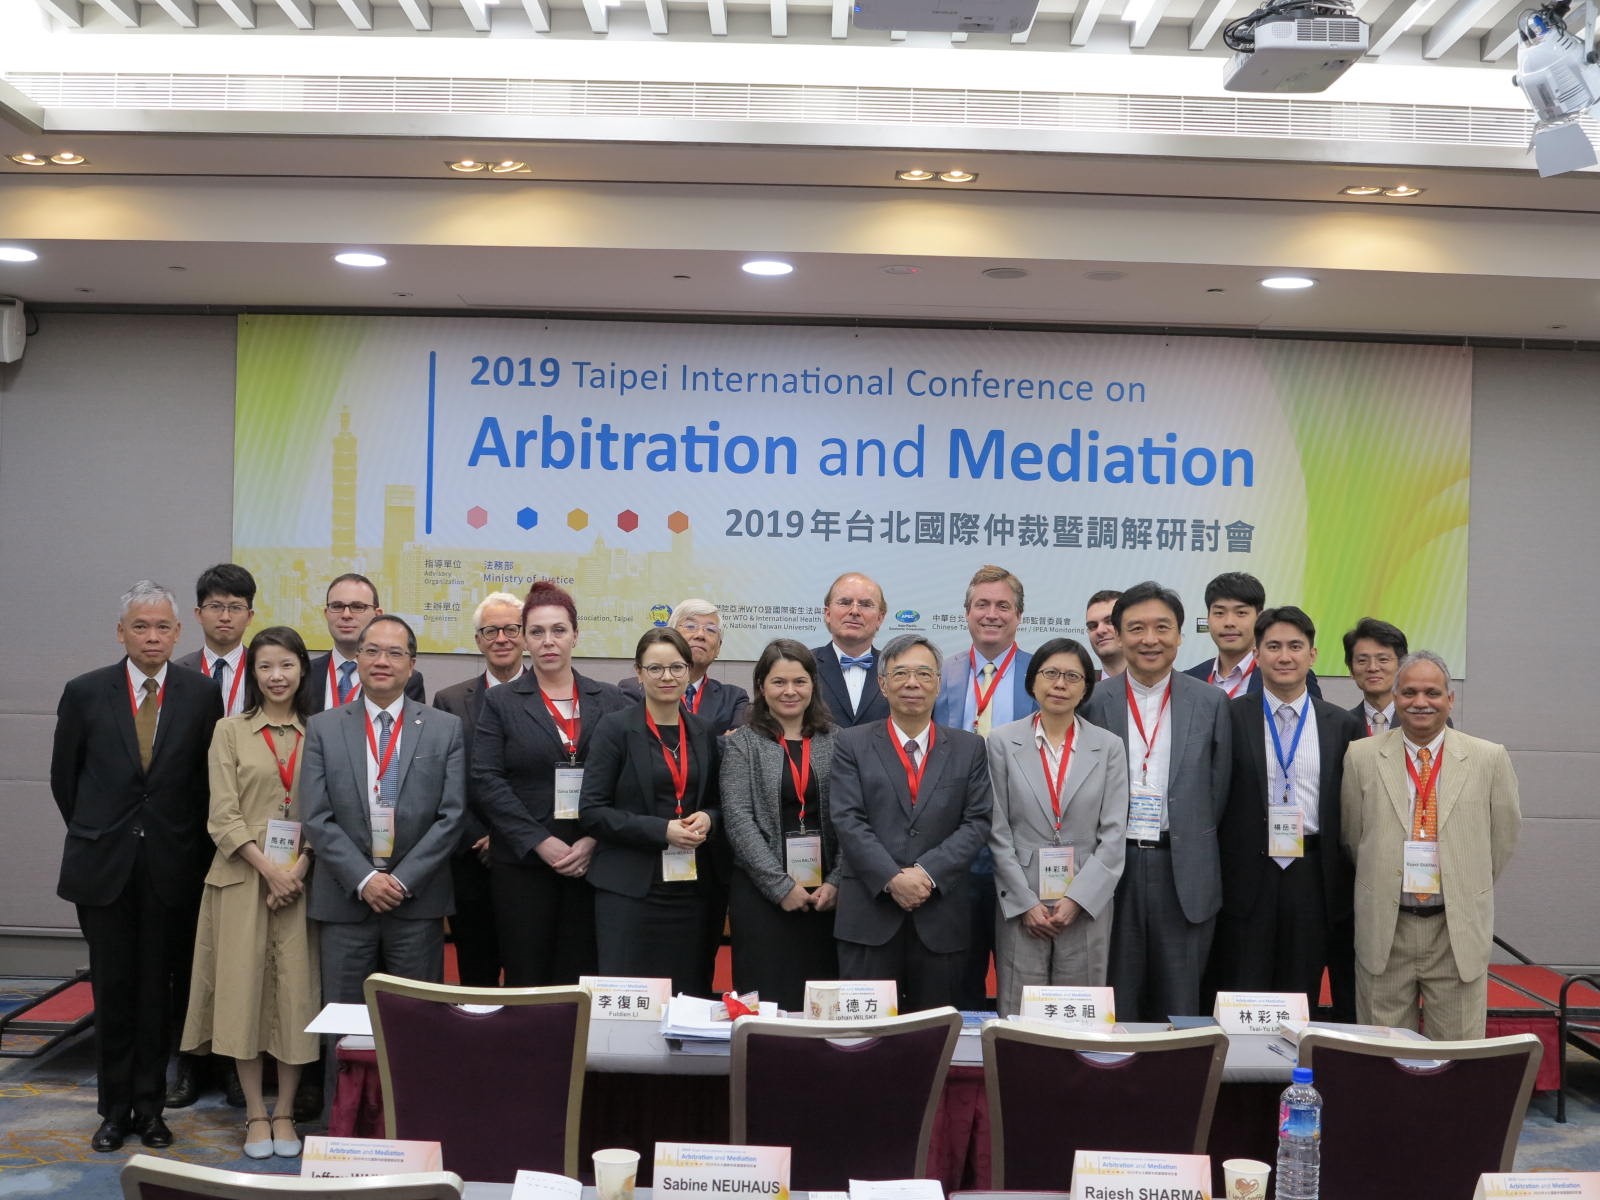 Group photo of 2019 Taipei International Conference